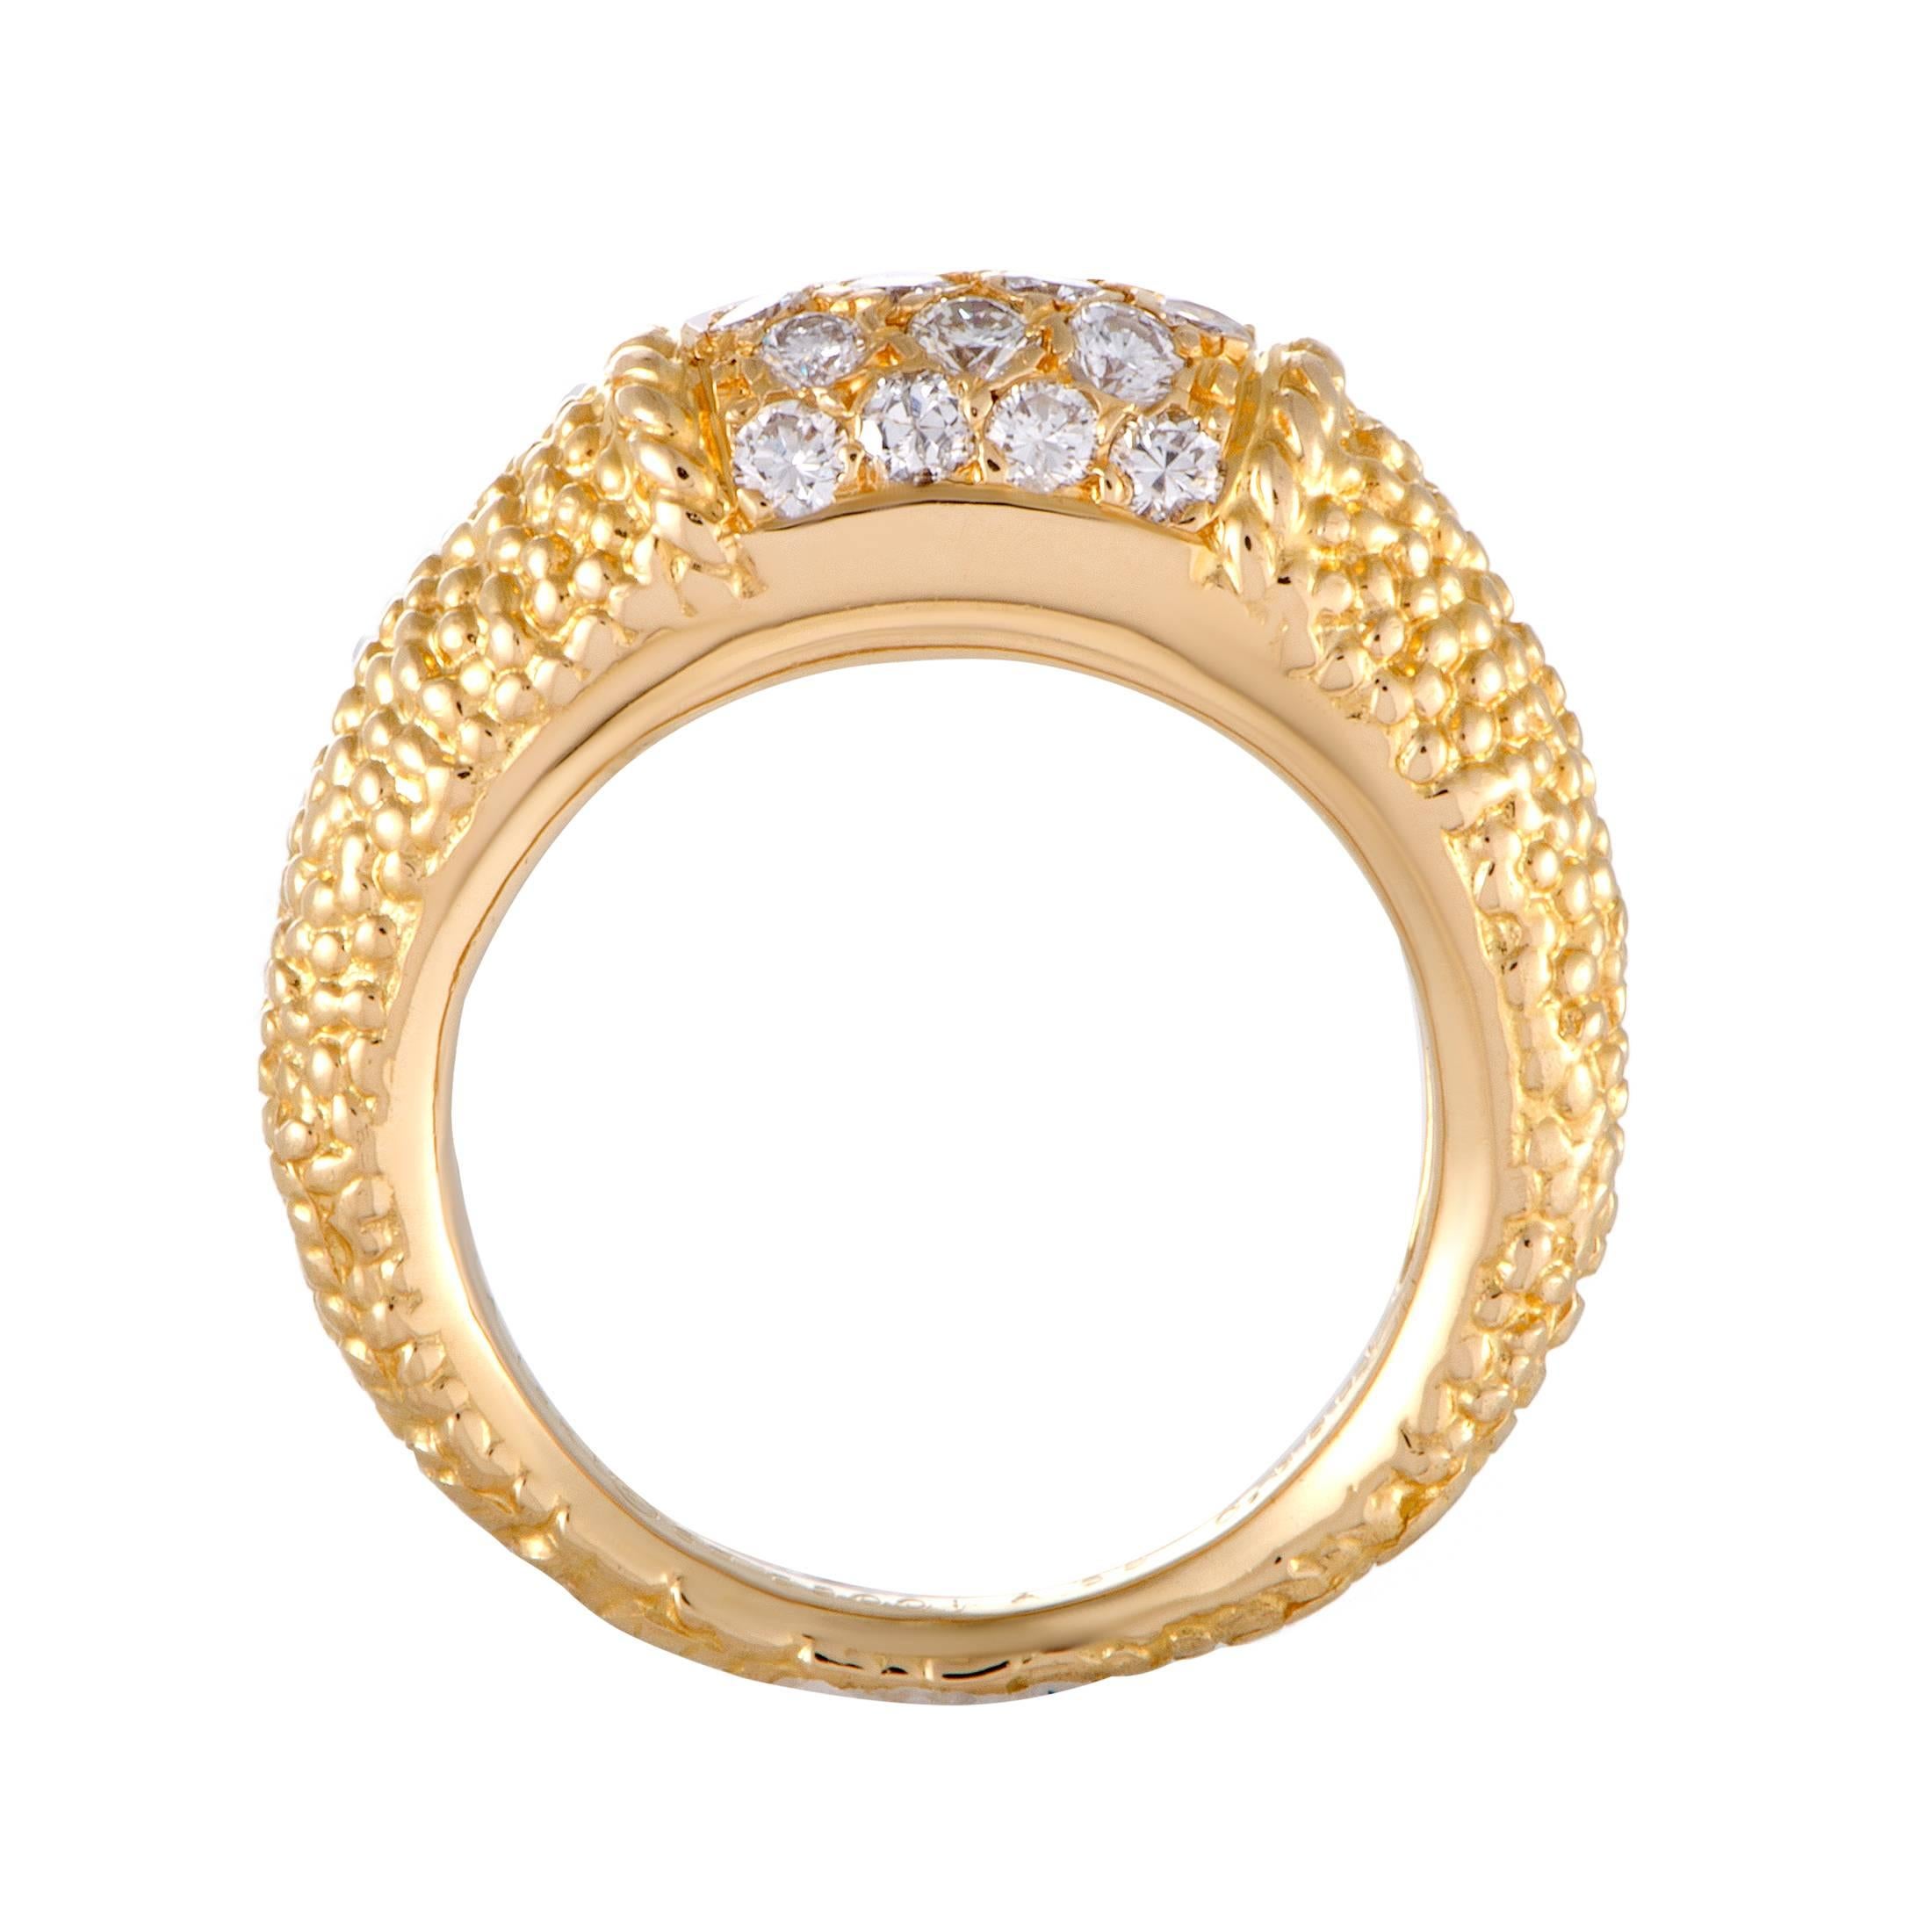 Splendid design and exquisite craftsmanship quality are combined in this 18K yellow gold ring into creating a piece of immense visual and aesthetic value. The ring is presented by Van Cleef & Arpels and embellished with 0.56 carats of scintillating